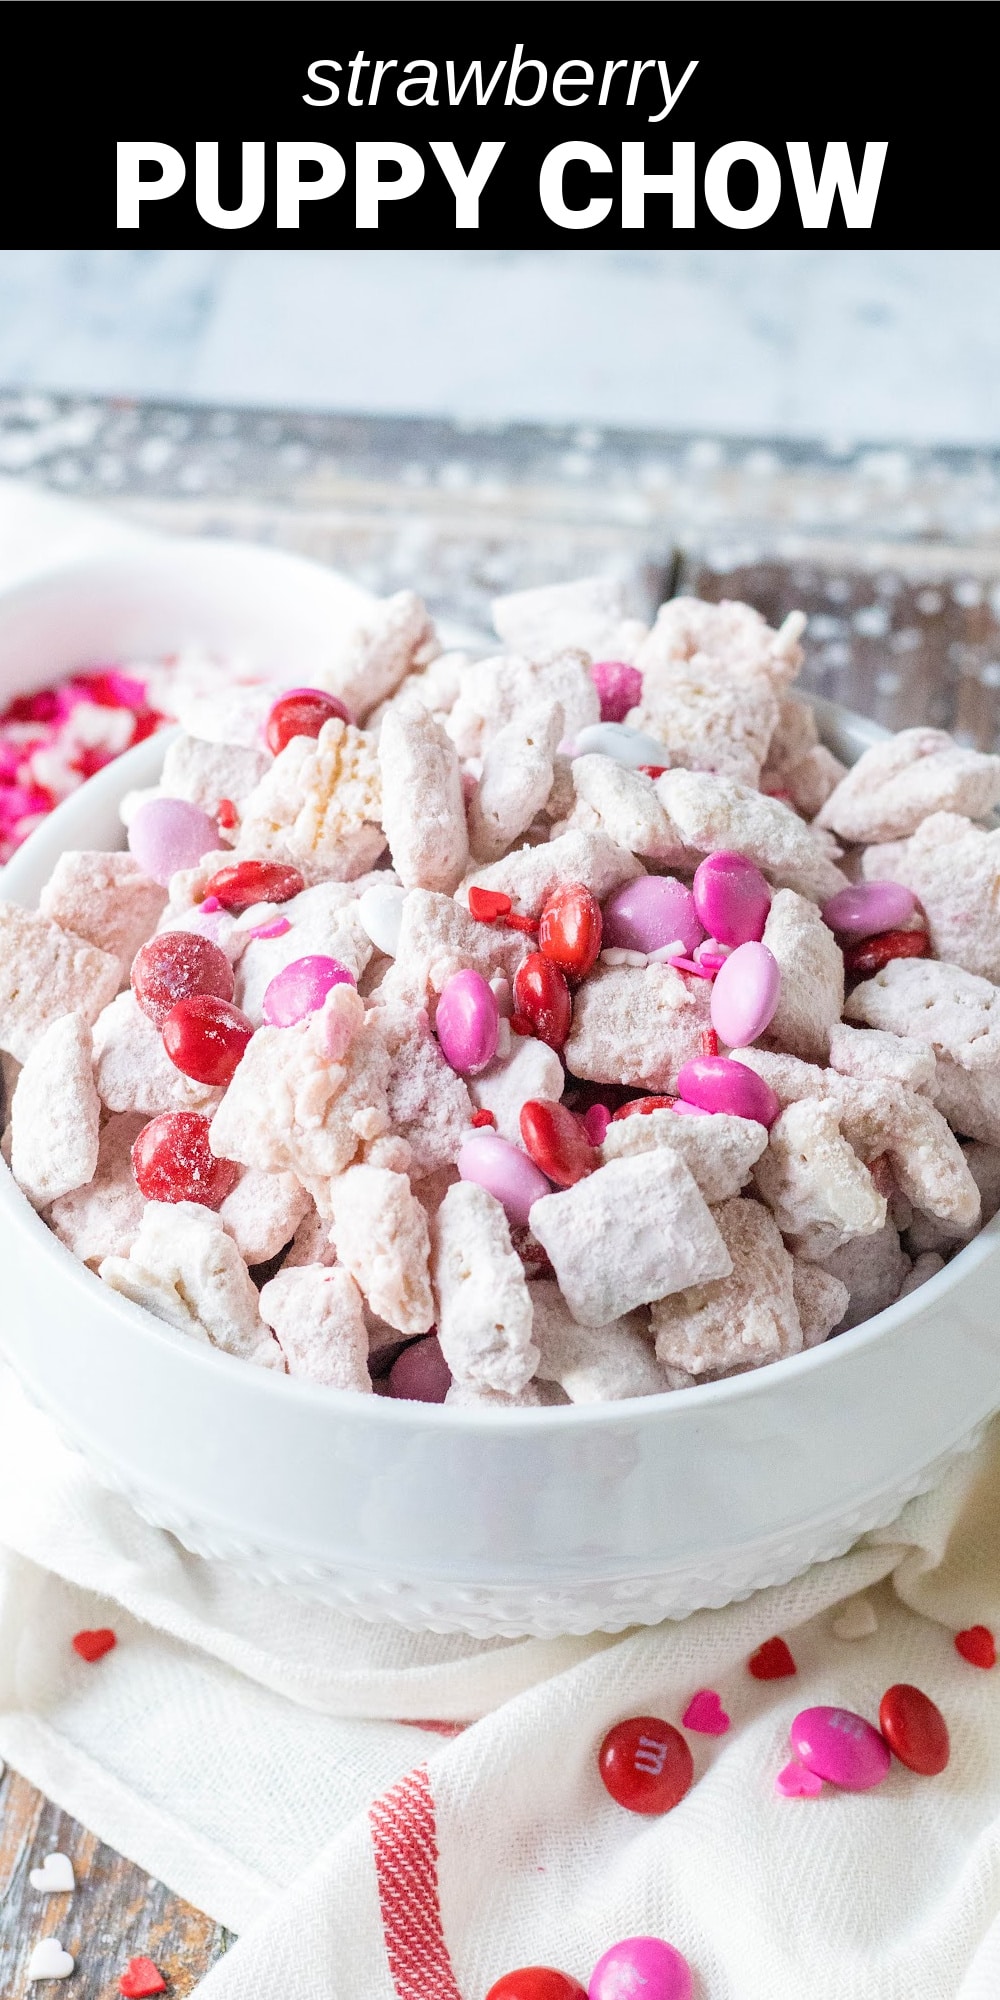 This strawberry puppy chow is an incredibly delicious sweet snack mix that’s perfect for your Valentine’s Day festivities. Crunchy Rice Chex cereal is coated in creamy white chocolate, then tossed with a mixture of powdered sugar, strawberry cake mix, pink and white M&Ms, and Valentine's sprinkles for a crunchy and sweet treat that you won’t want to put down.